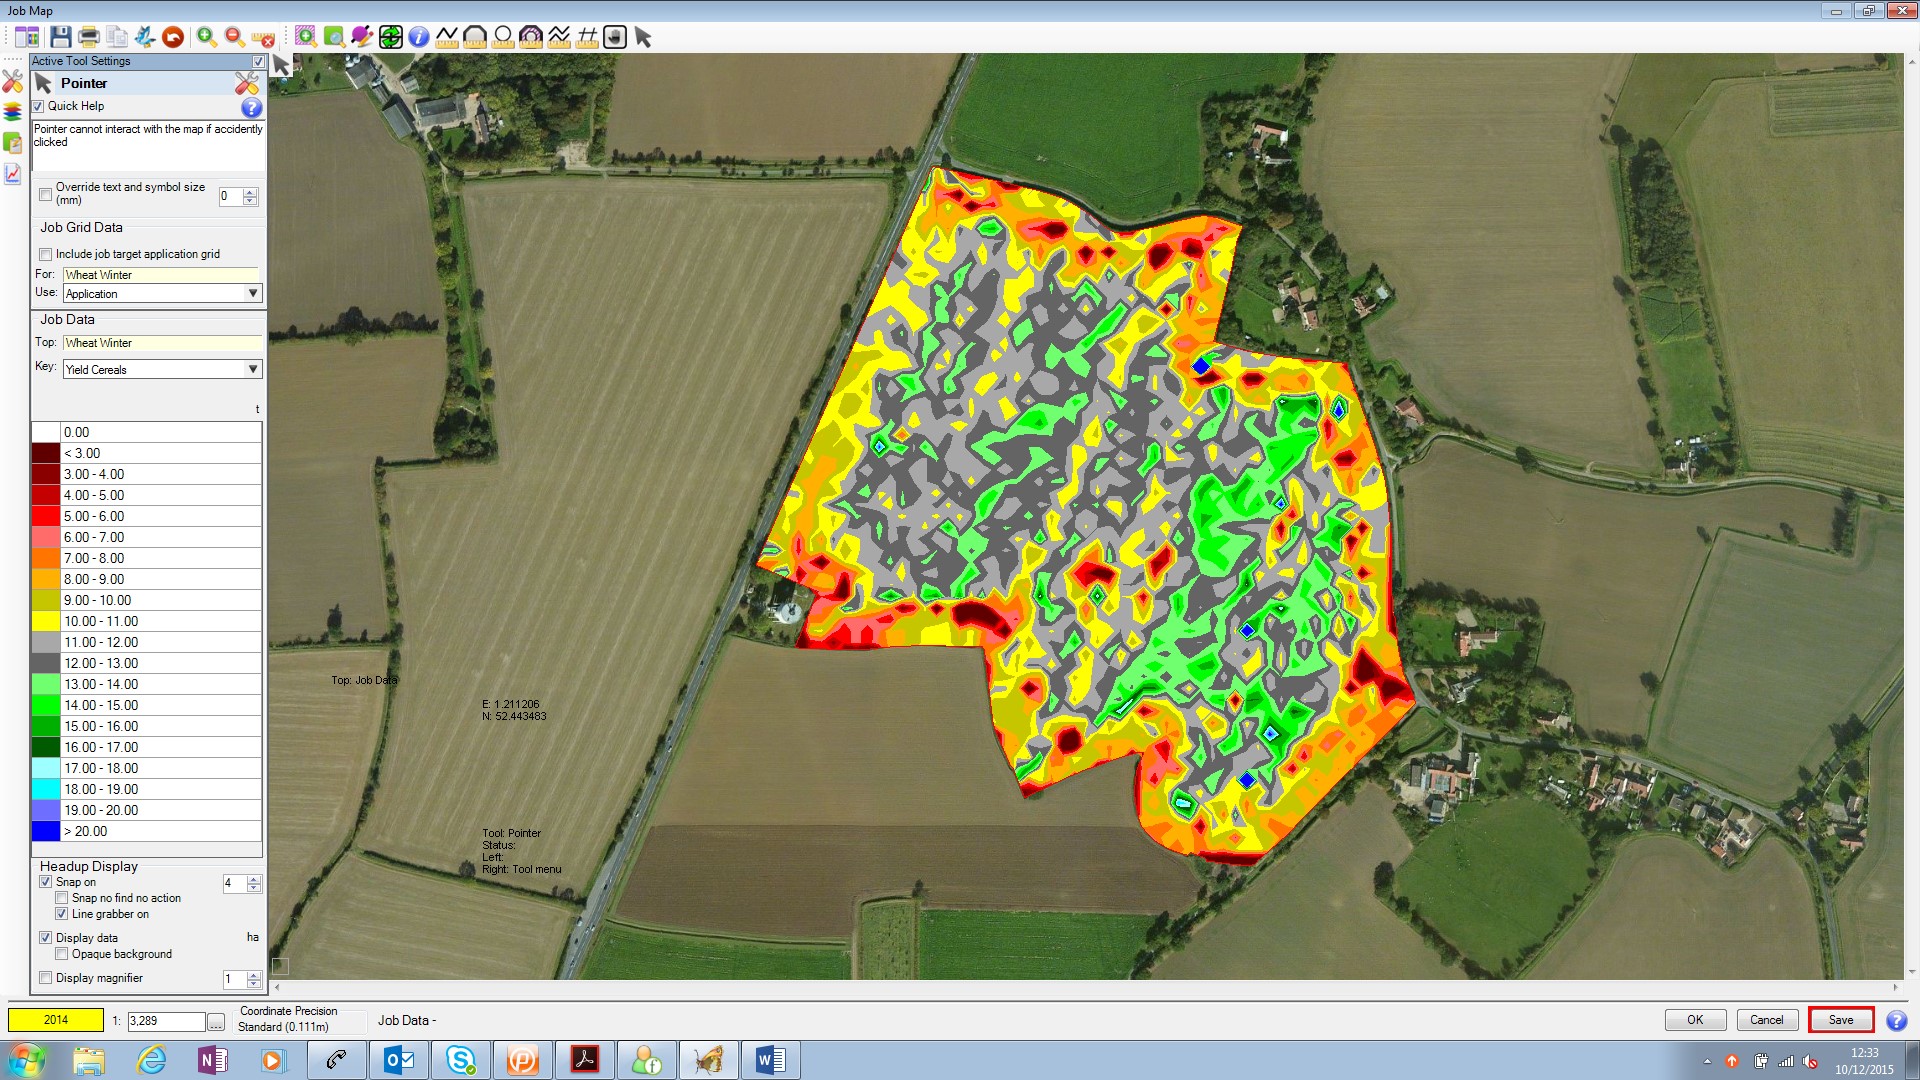 Putting yield maps to good use